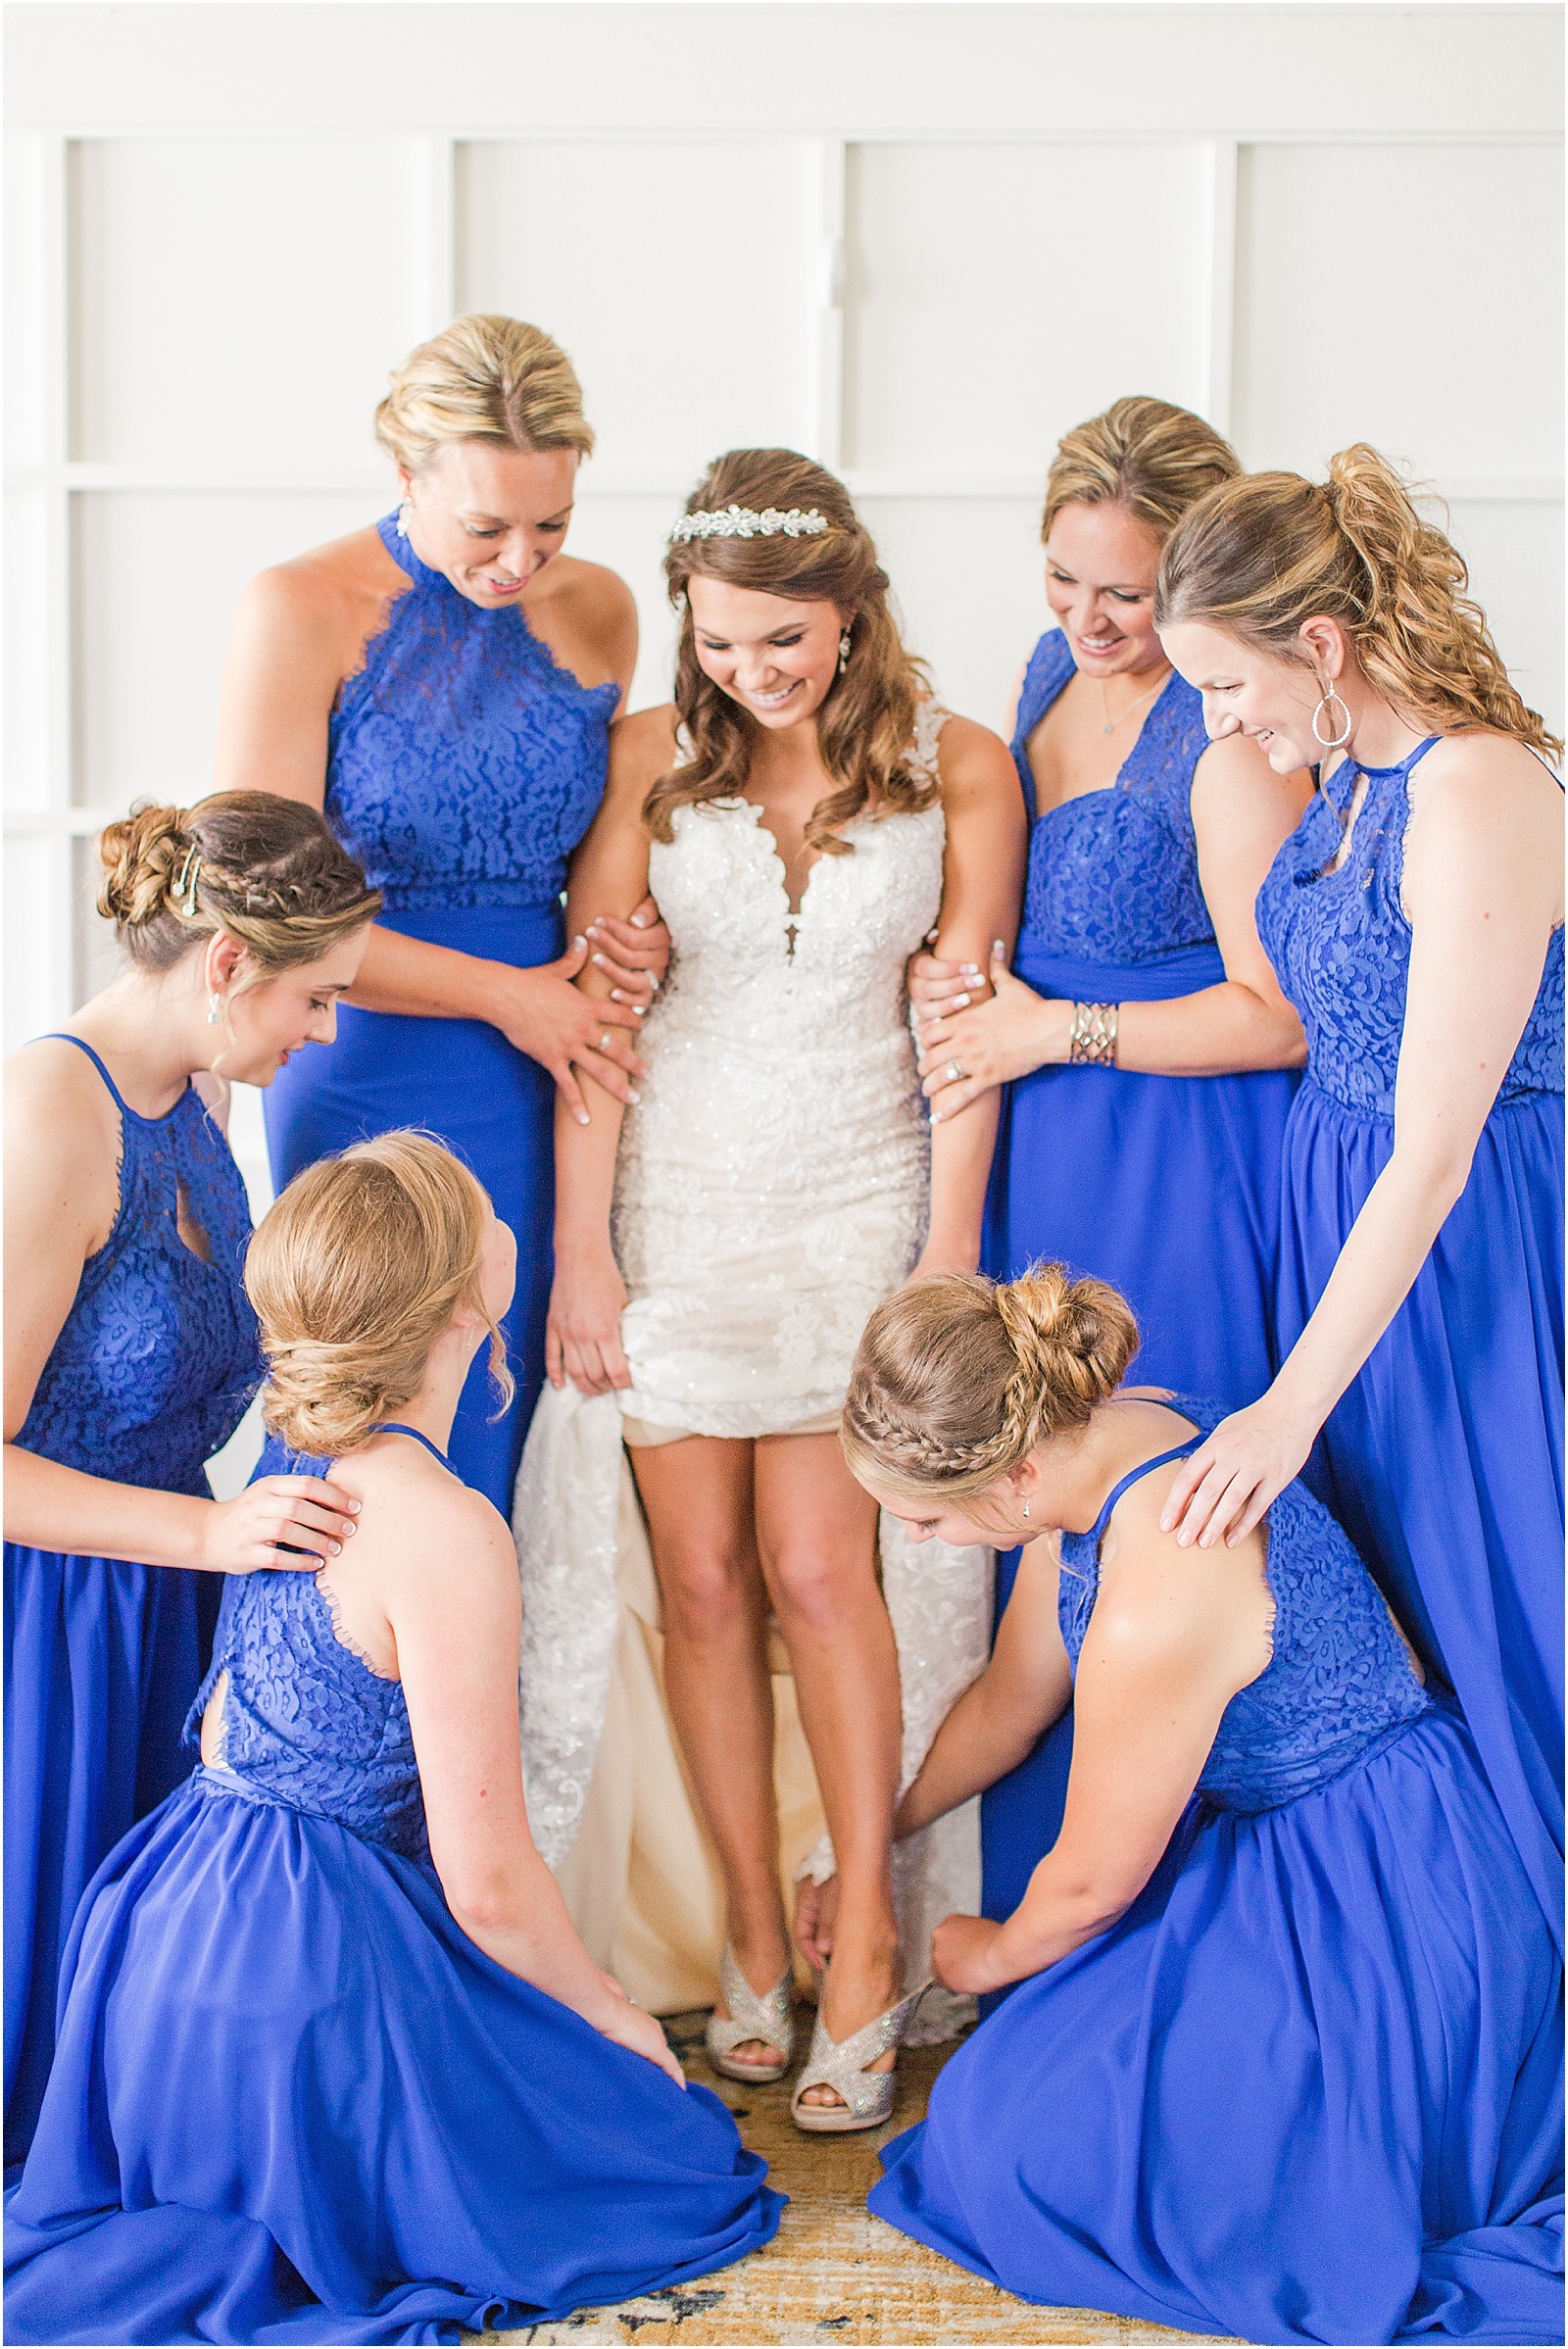 An Evansville County Club Wedding | Abby and Stratton 025.jpg